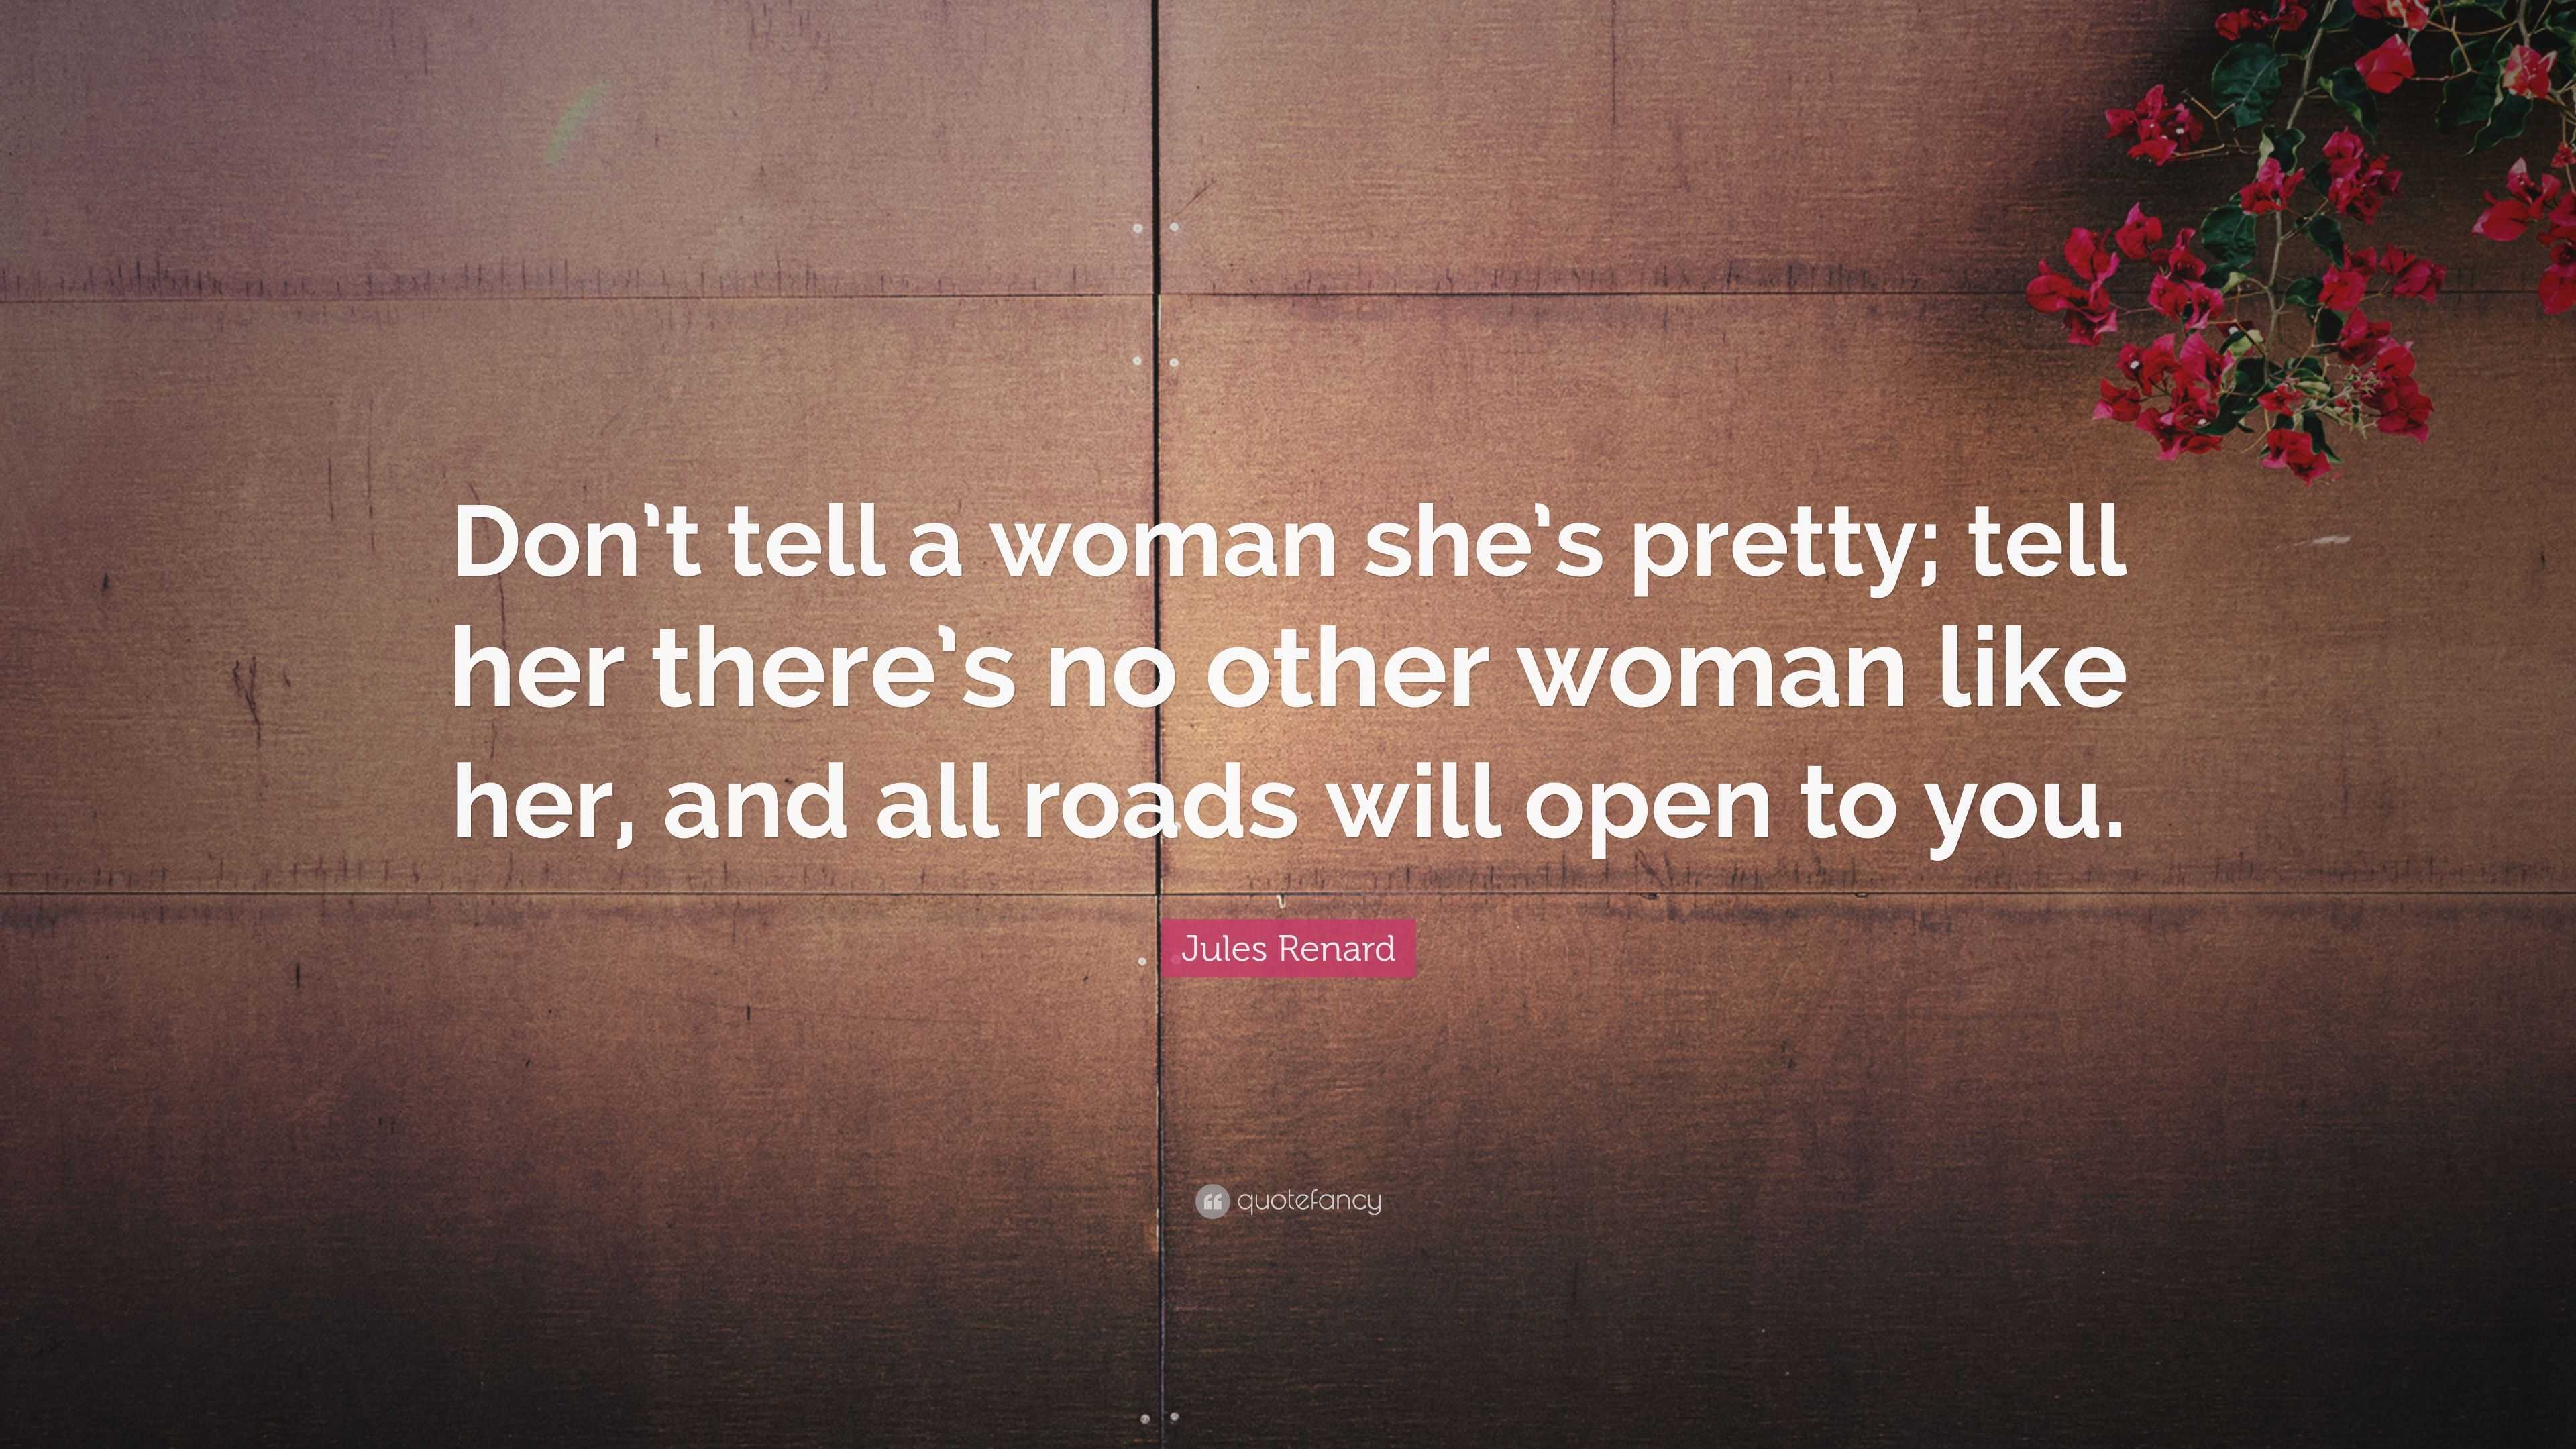 Jules Renard Quote “Don t tell a woman she s pretty tell her